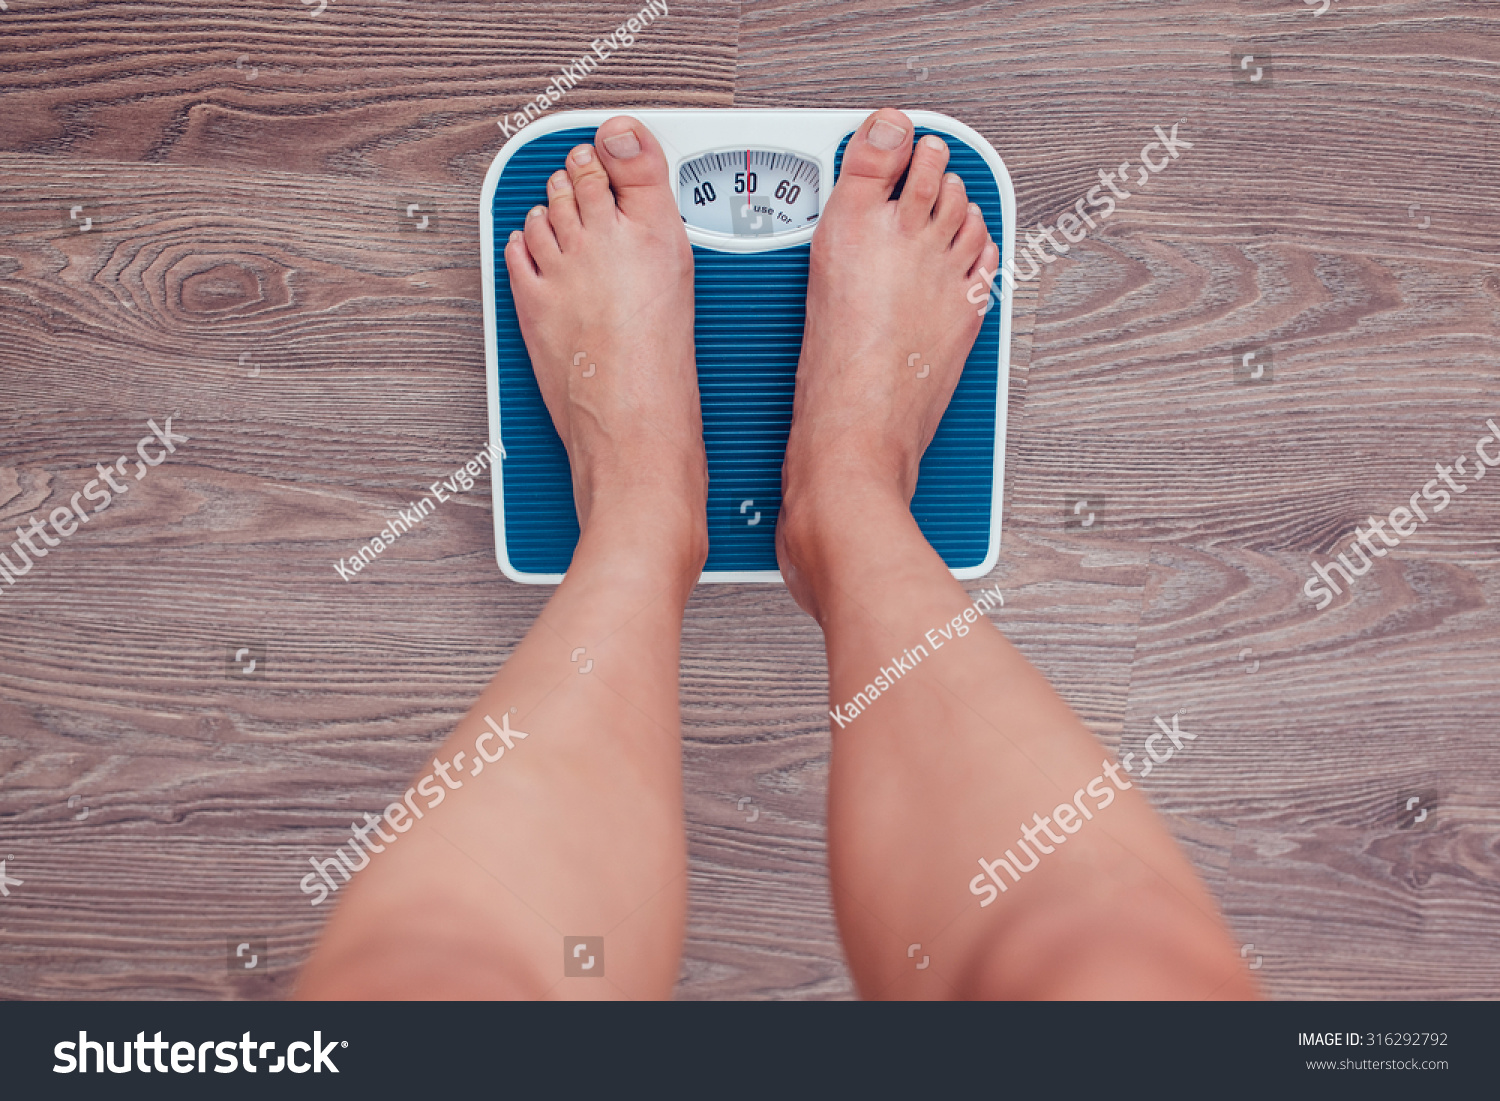 Girl is measuring her weight on the scales. #316292792